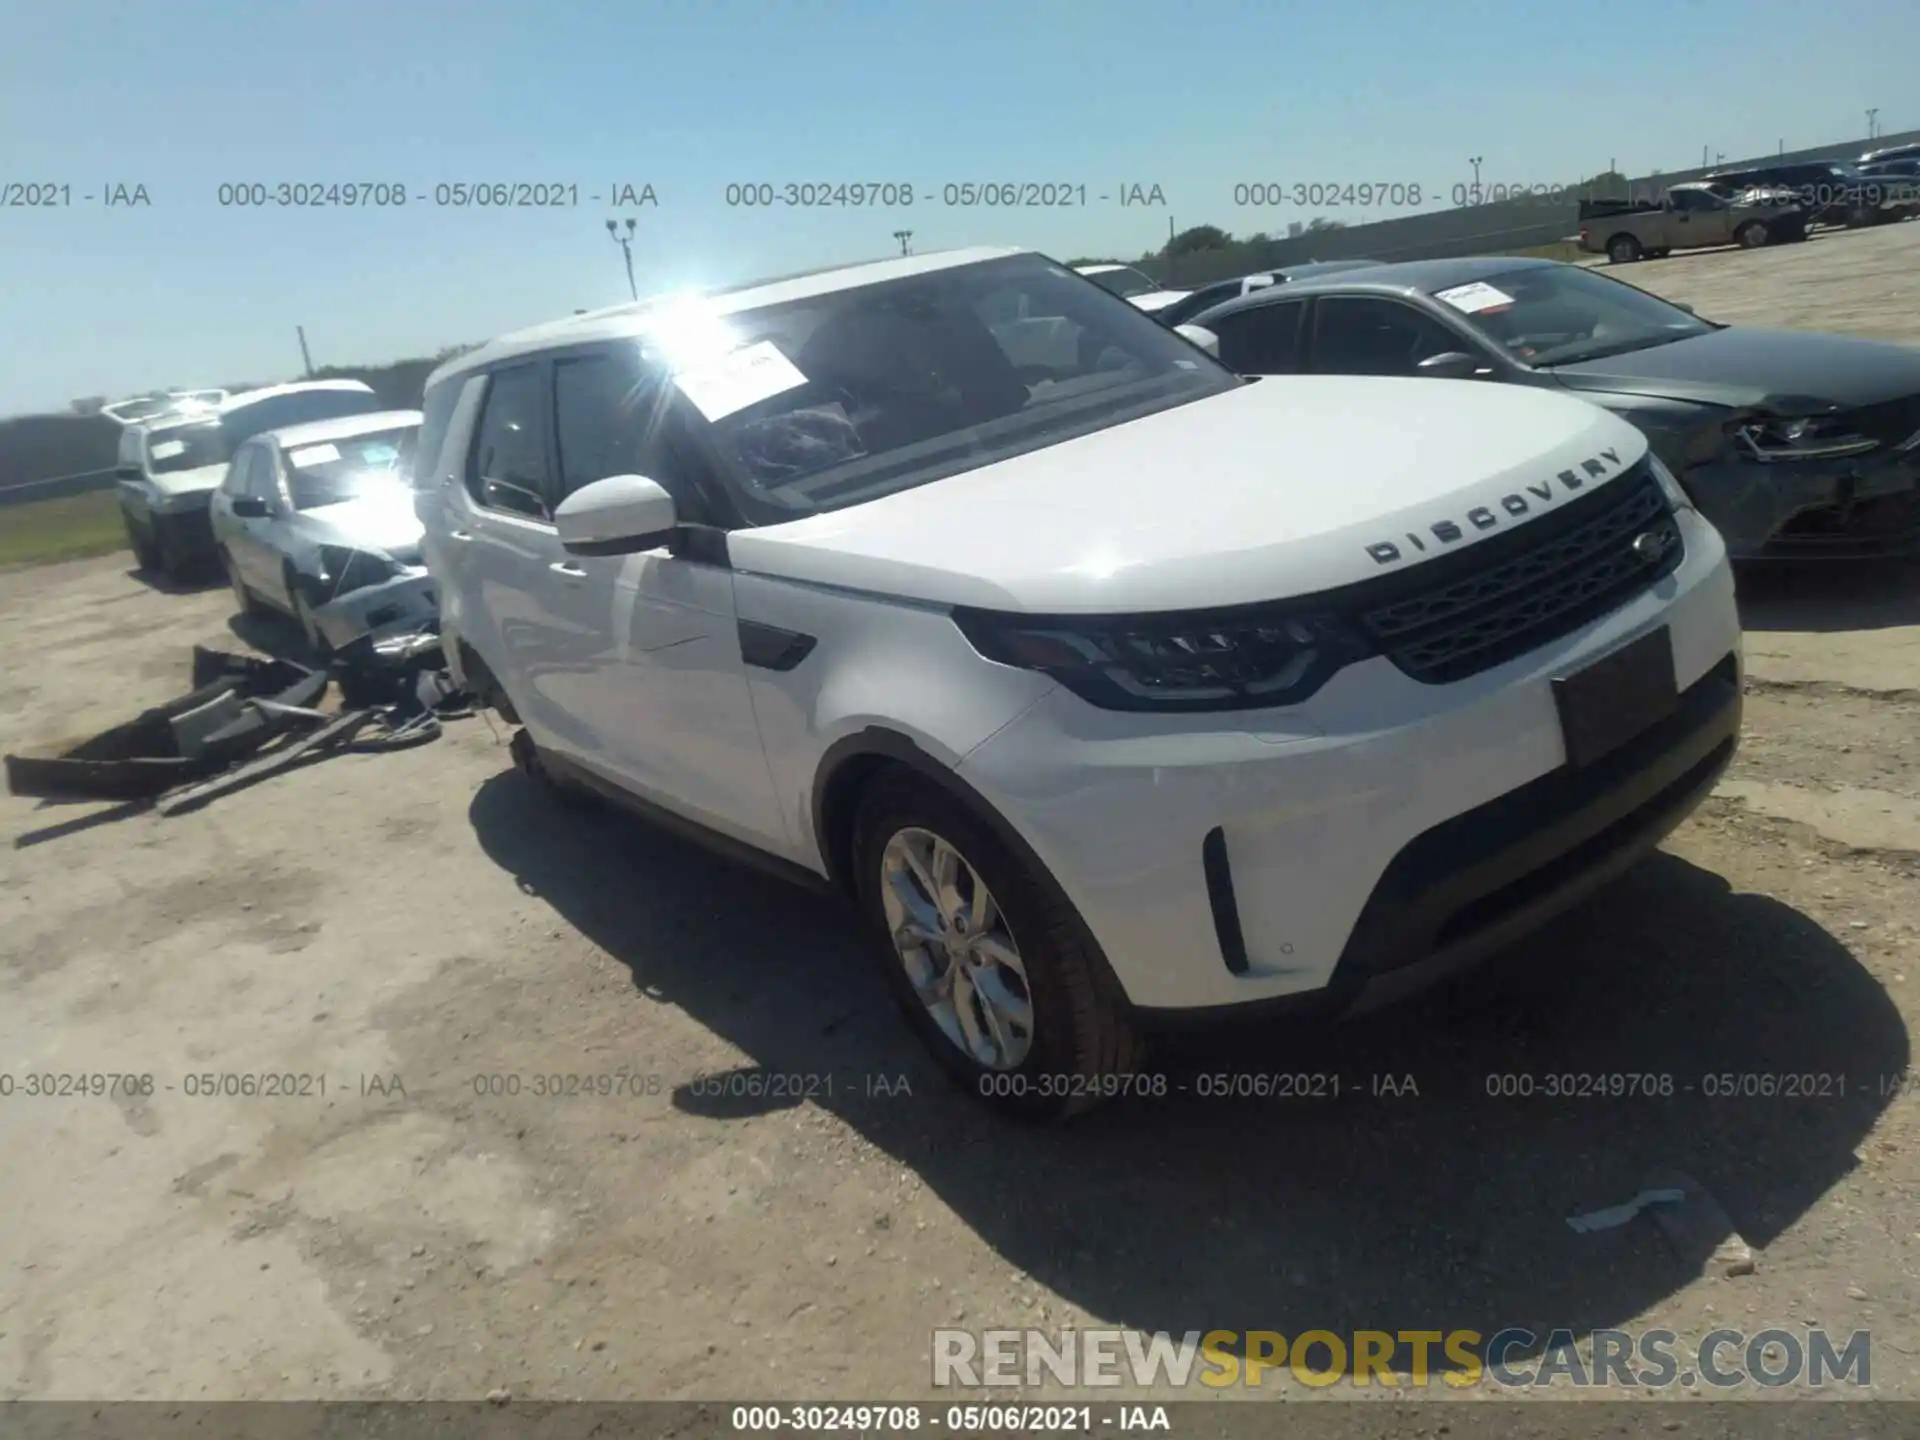 1 Photograph of a damaged car SALRG2RV4L2417250 LAND ROVER DISCOVERY 2020